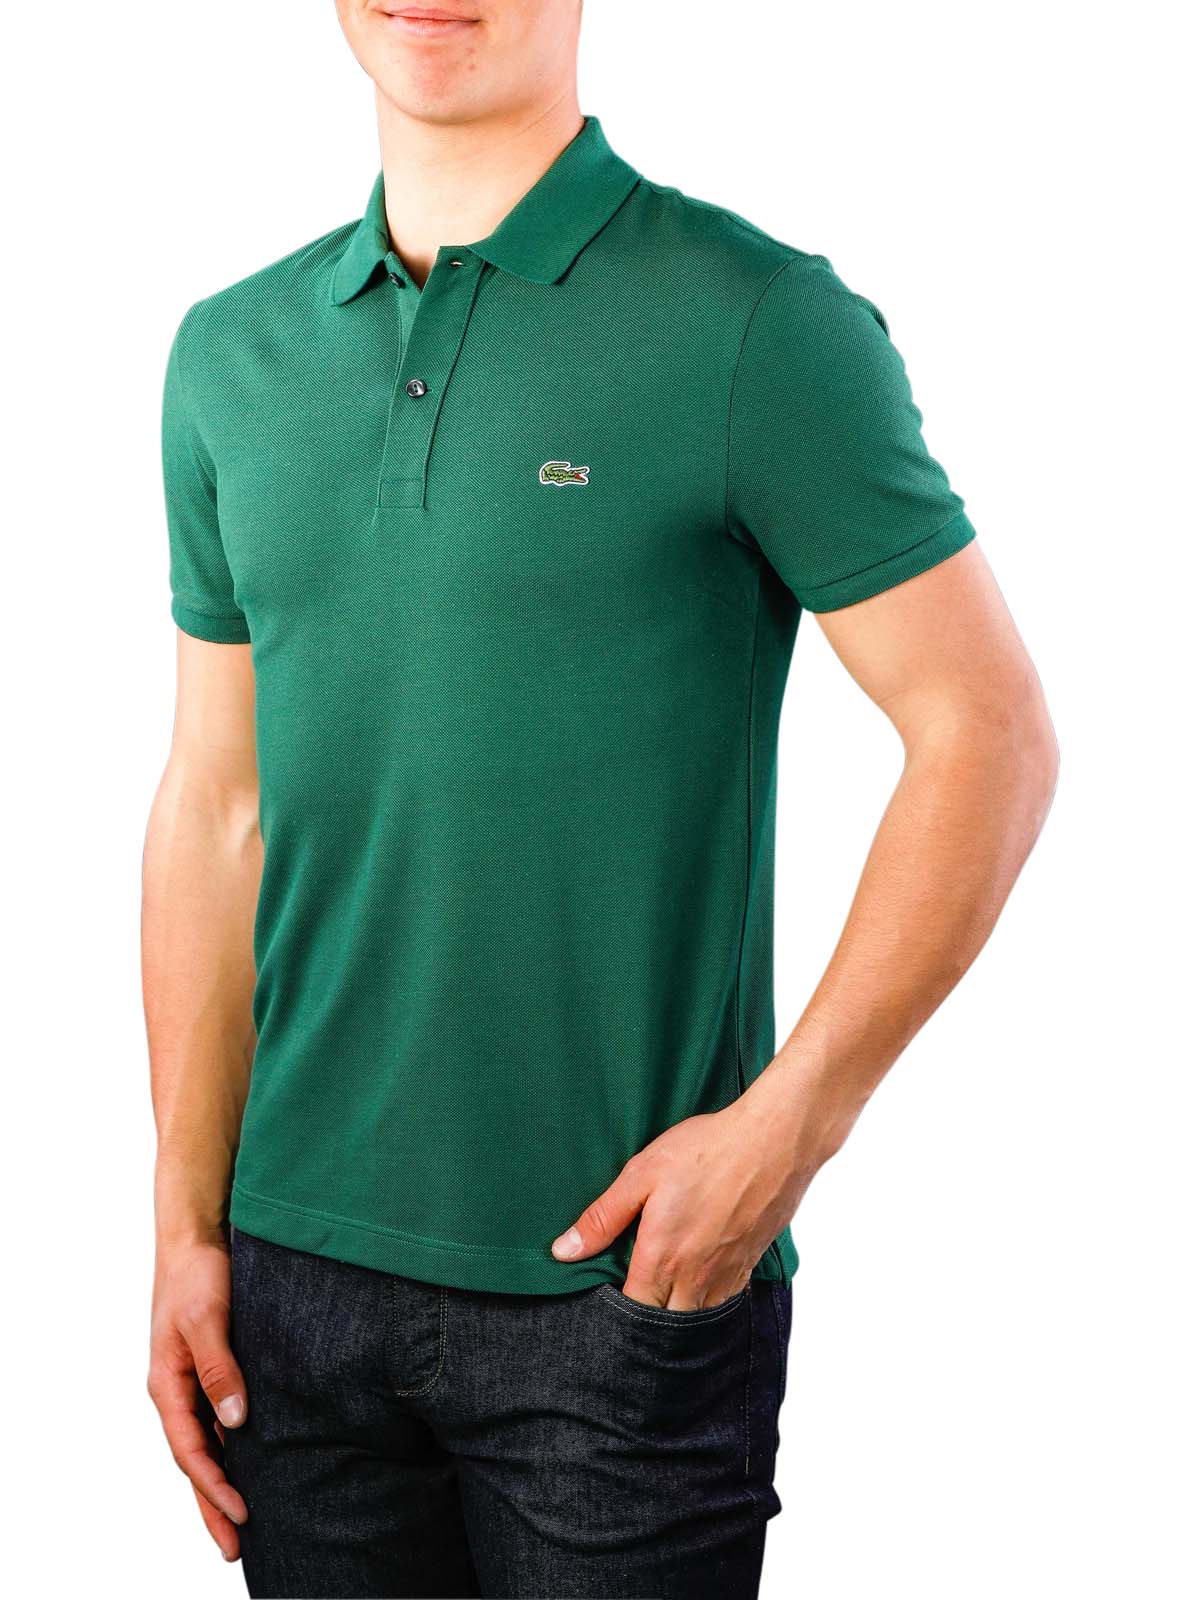 Shirt Slim Short Sleeves vert Lacoste Men's Polo Shirt | Free Shipping on - SIMPLY LOOK